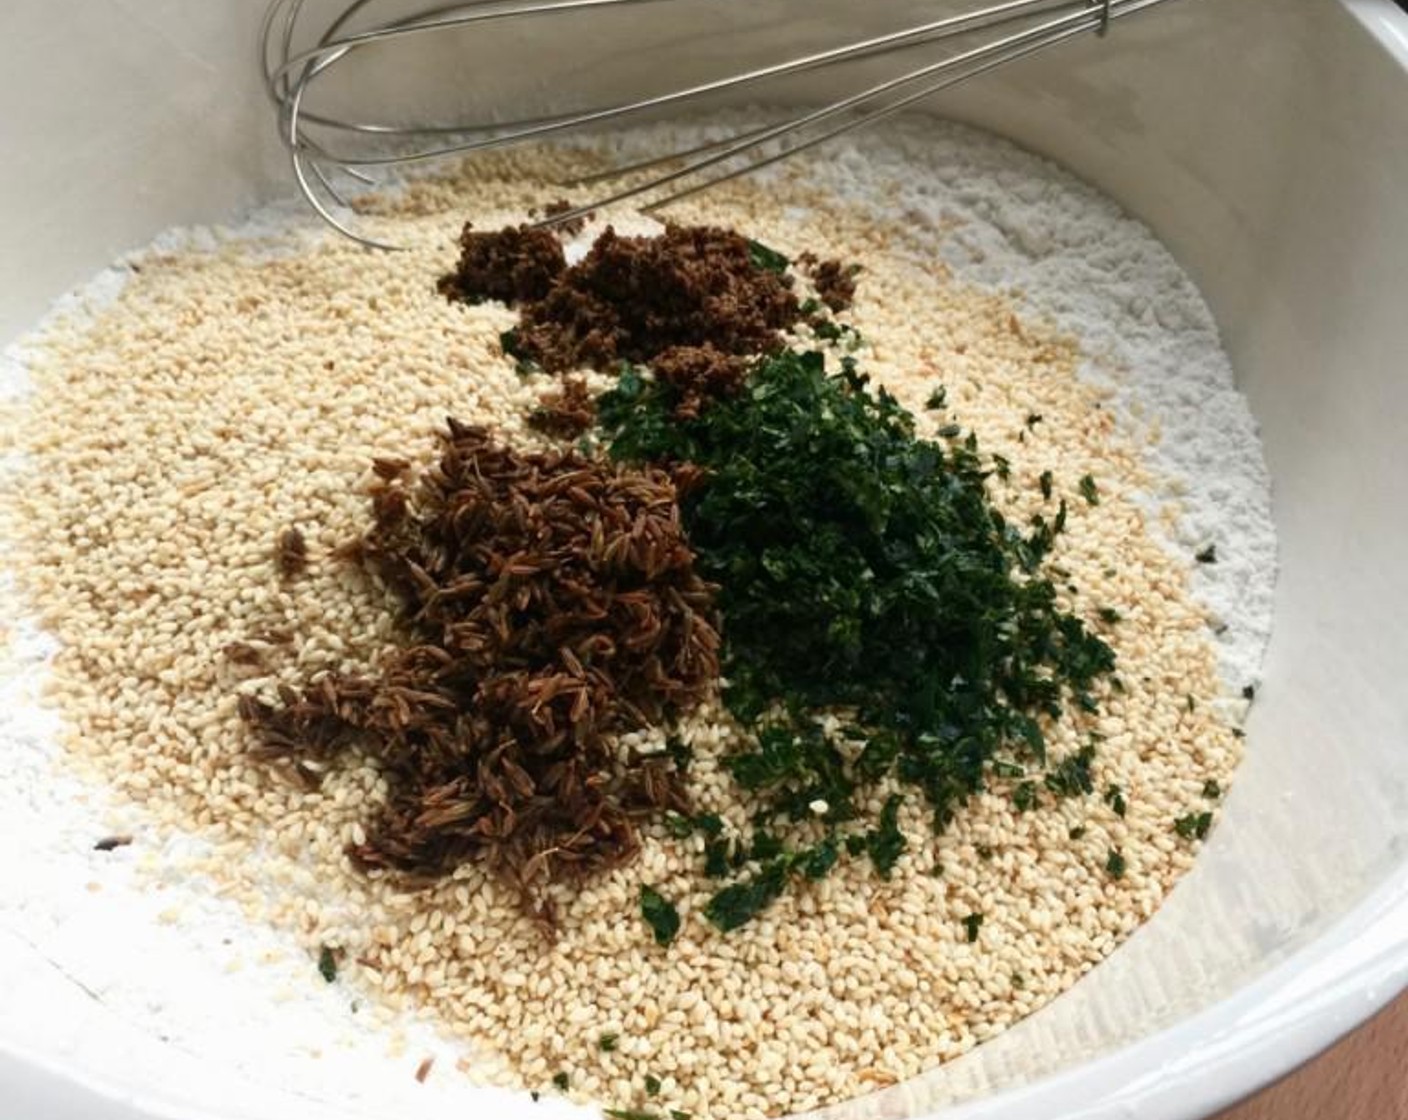 step 5 Then place the roasted murukku mix, Sweet Glutinous Rice Flour (1 2/3 cups), Rice Flour (2/3 cup), Ajwain Seeds (1 Tbsp), Cumin Seeds (1 Tbsp), and White Sesame Seeds (1/2 cup) in a large mixing bowl. Stir to mix everything together.